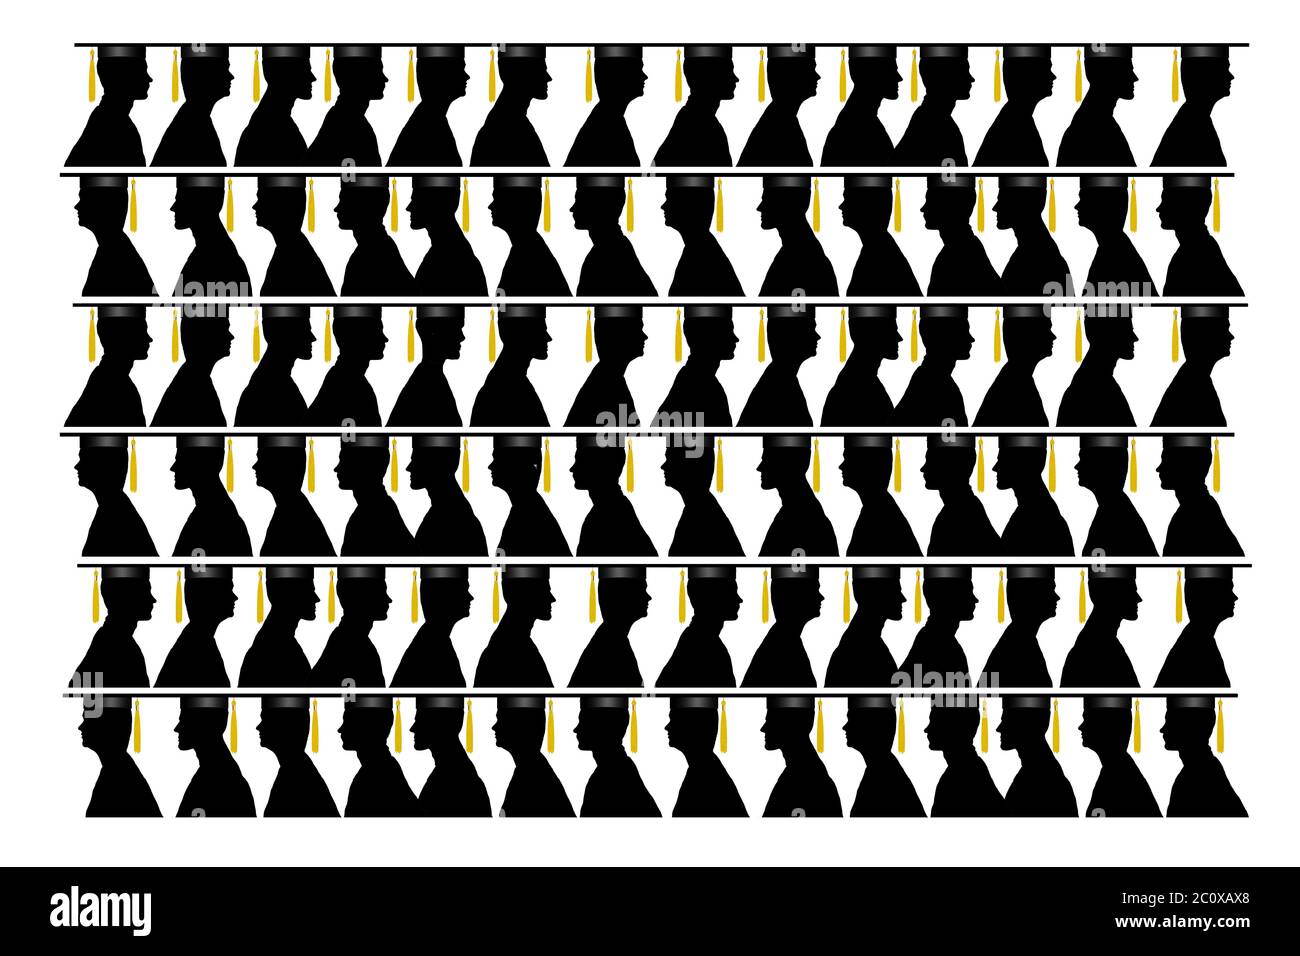 Silhouetted graduates in cap and gowns are seen in rows as they line up for graduation. Isolated on a white background. Gold tassles. Illustration. Stock Photo